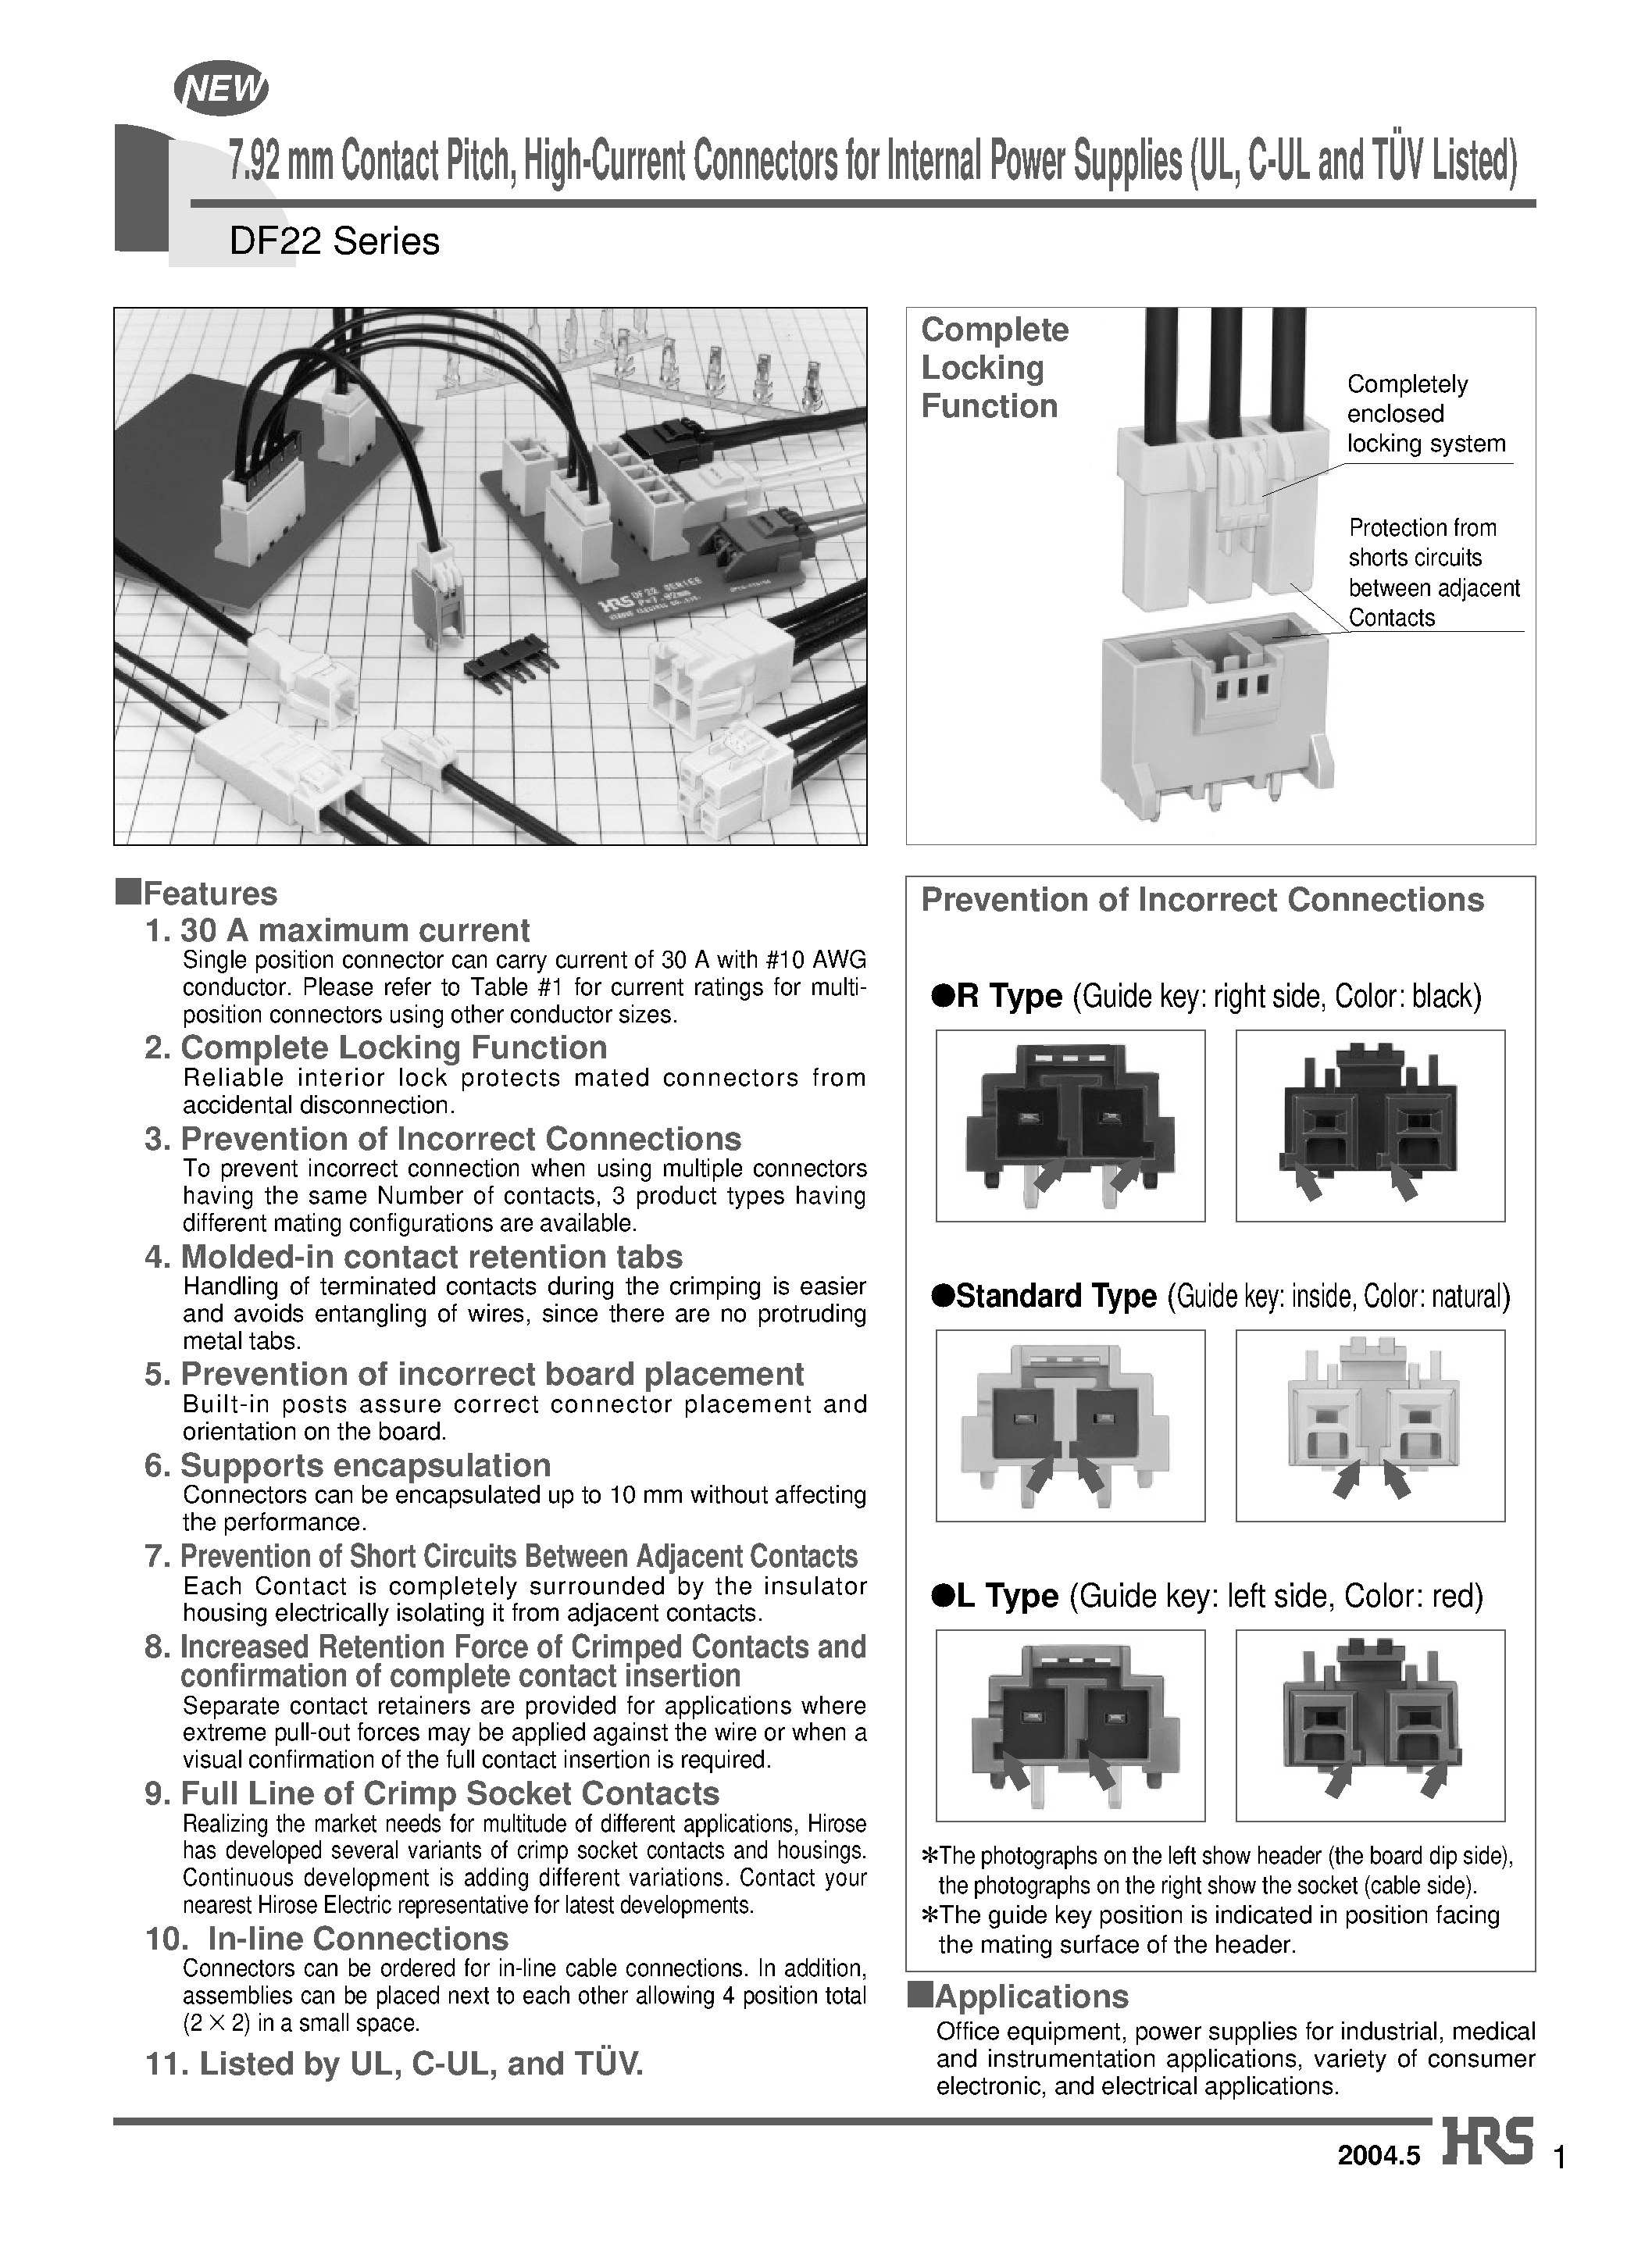 Даташит DF22AL-2S-7.92DSA - 7.92 mm Contact Pitch/ High-Current Connectors for Internal Power Supplies (UL/ C-UL and TUV Listed) страница 1